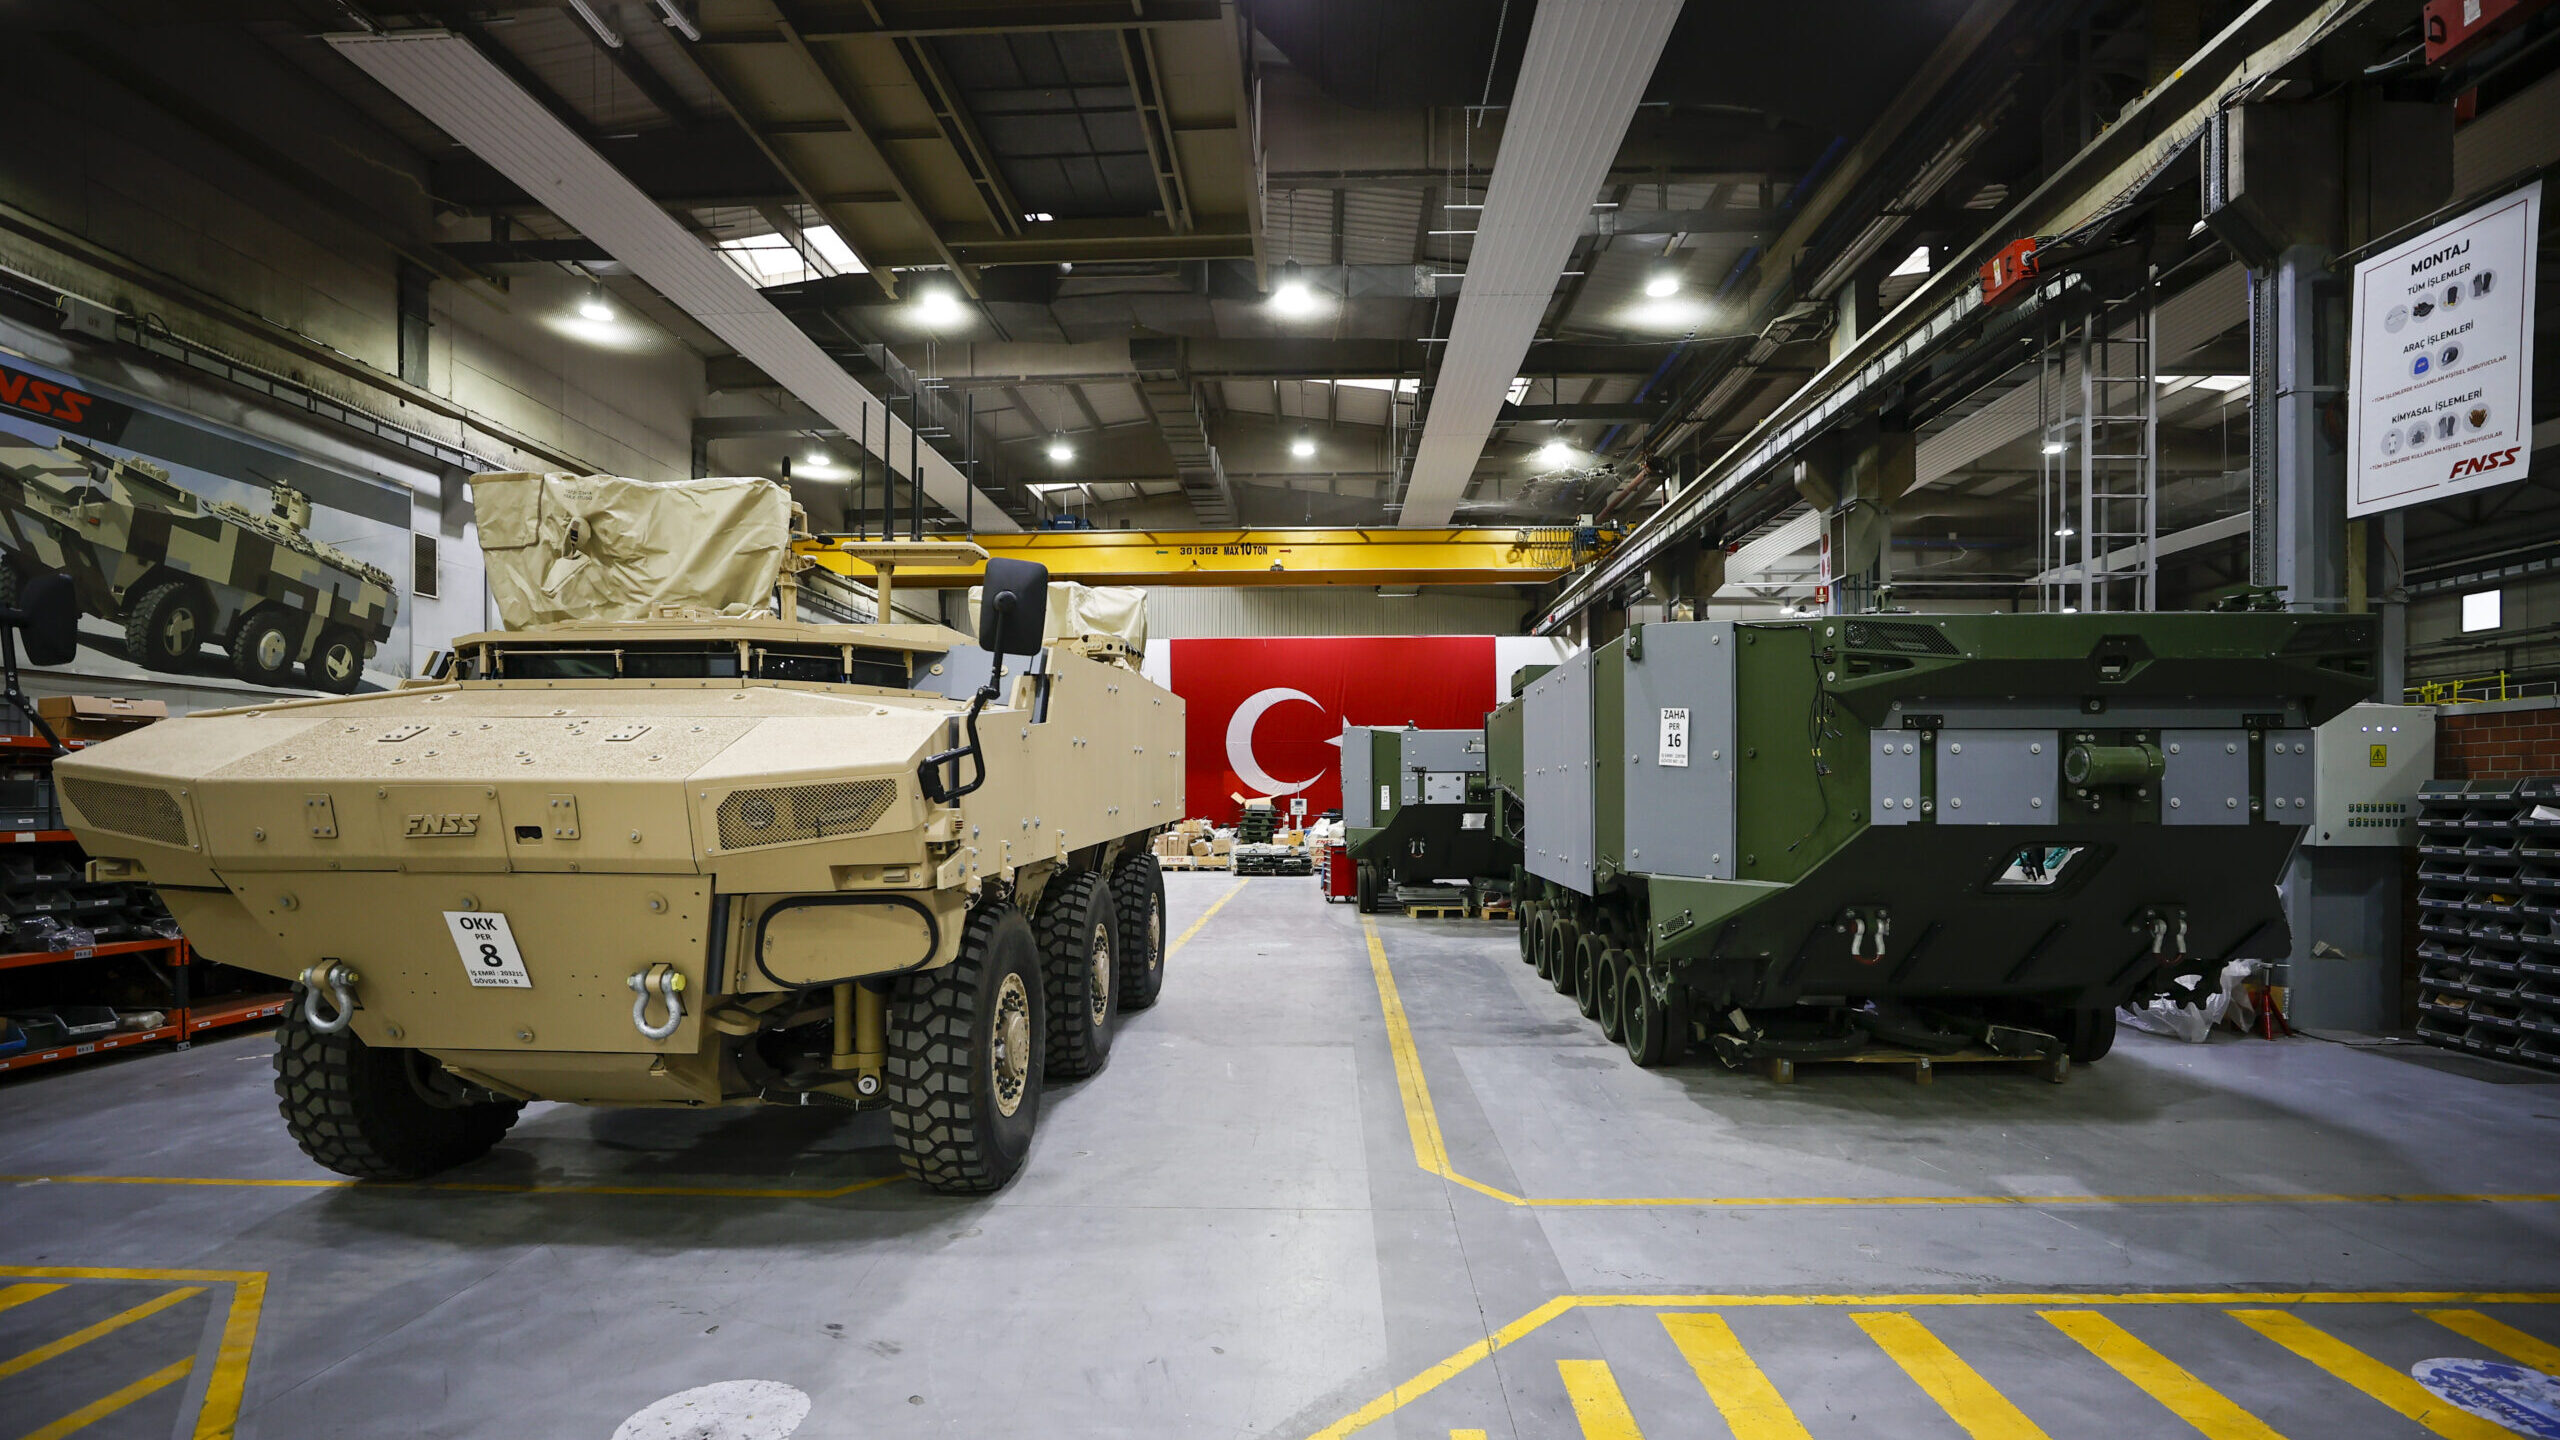 Turkish defense exports jump led by interest in land systems, drones: Report